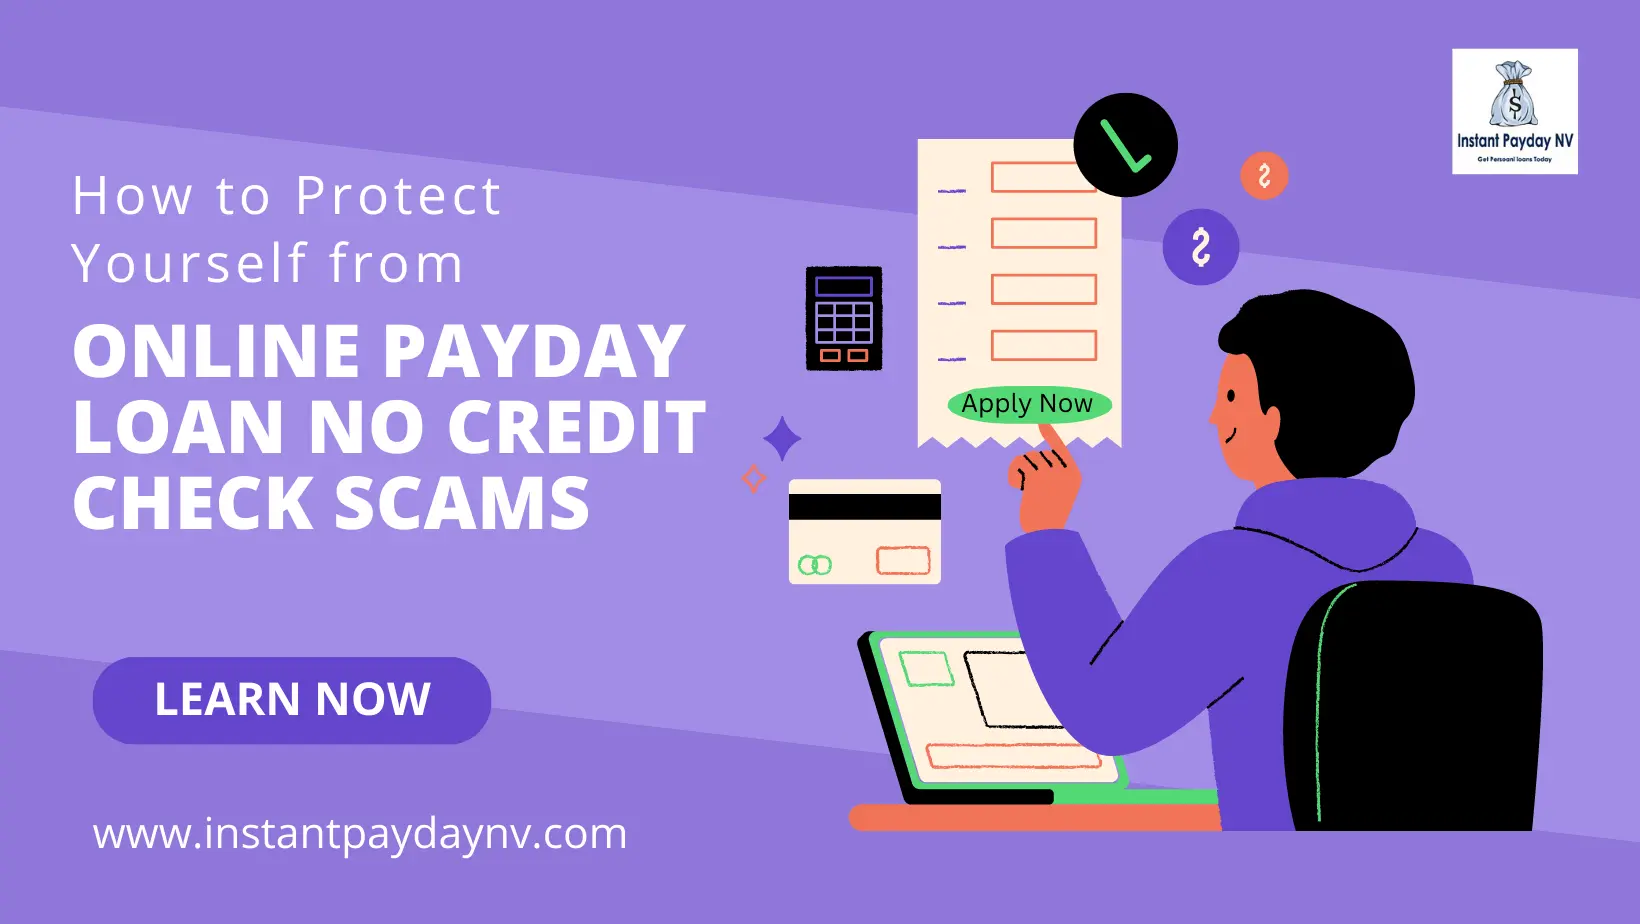 How to Protect Yourself from Online Payday Loan No Credit Check Scams